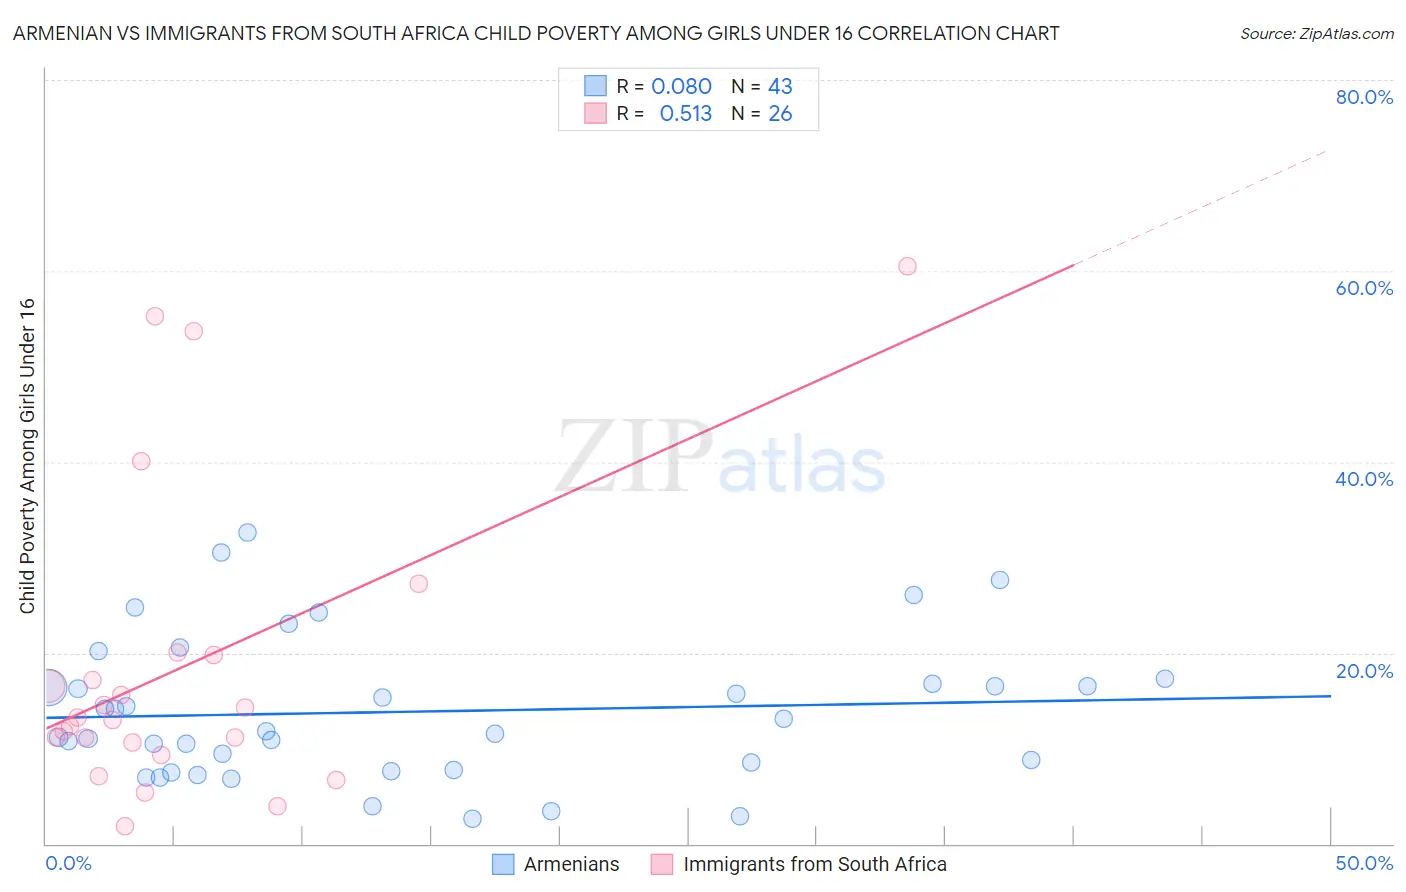 Armenian vs Immigrants from South Africa Child Poverty Among Girls Under 16